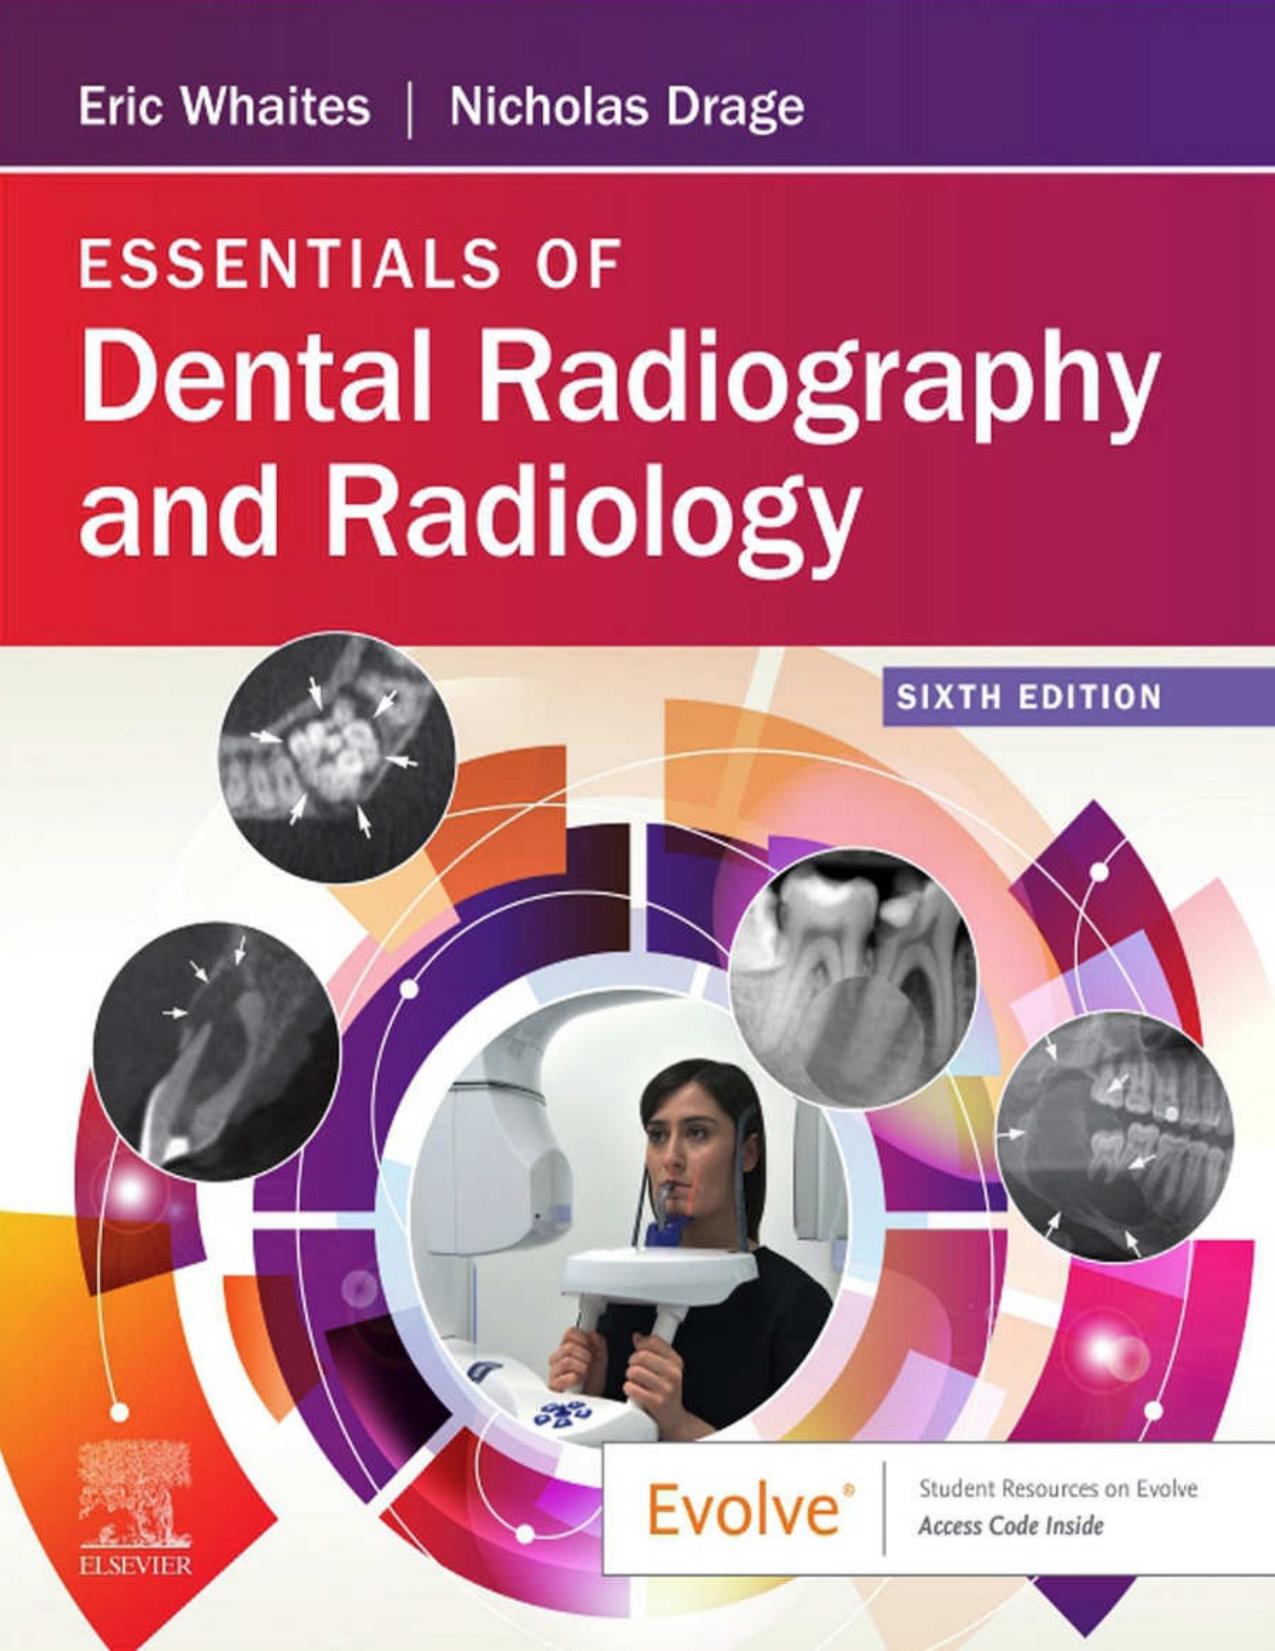 Essentials of Dental Radiography and Radiology  (2020)